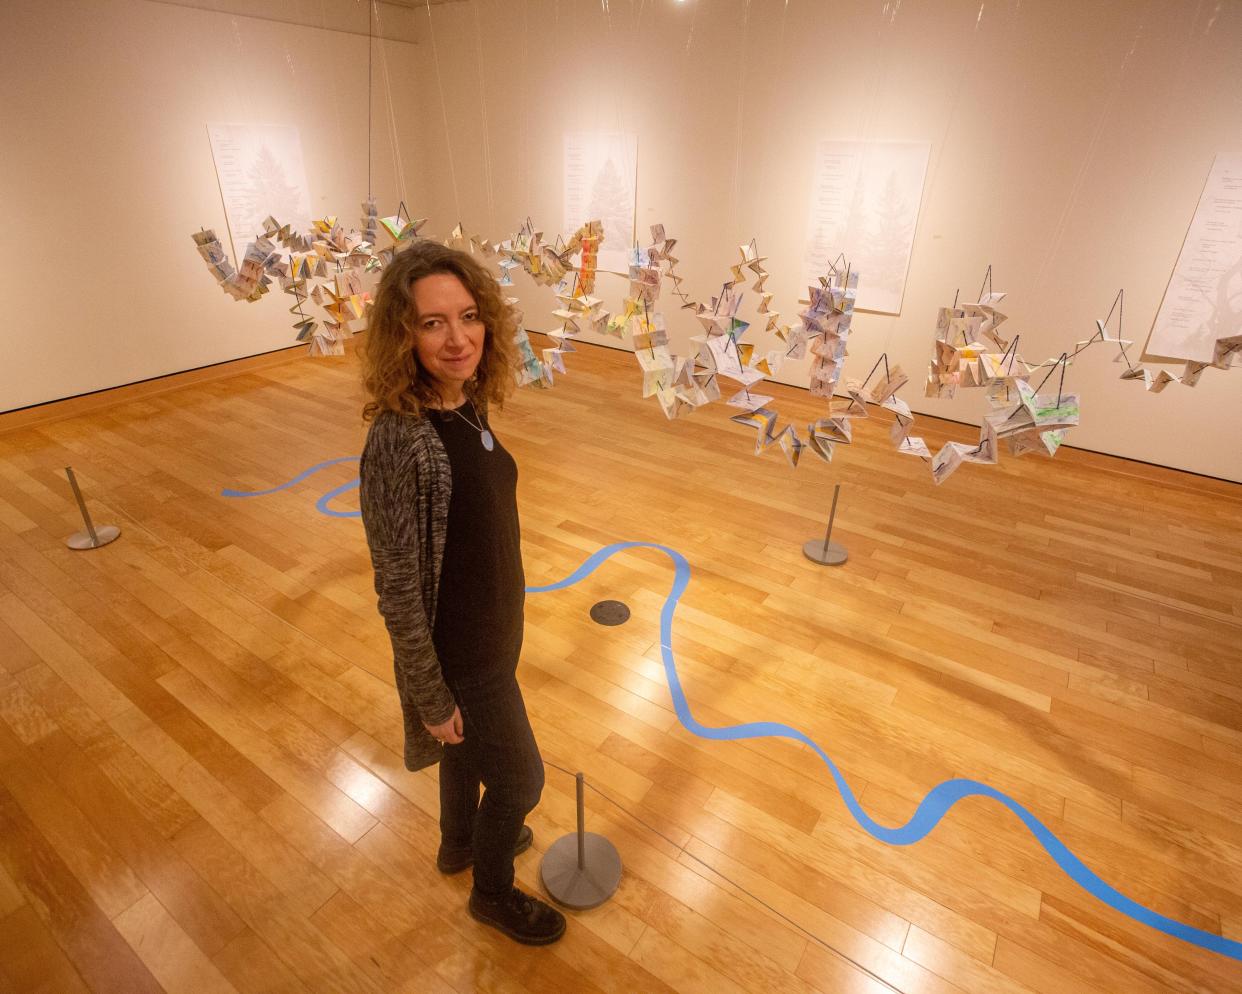 Rachel Epp Buller's art exhibition "Invitations to Listen" challenges listeners, viewers and walkers to rethink how they observe and interact with the world around them.